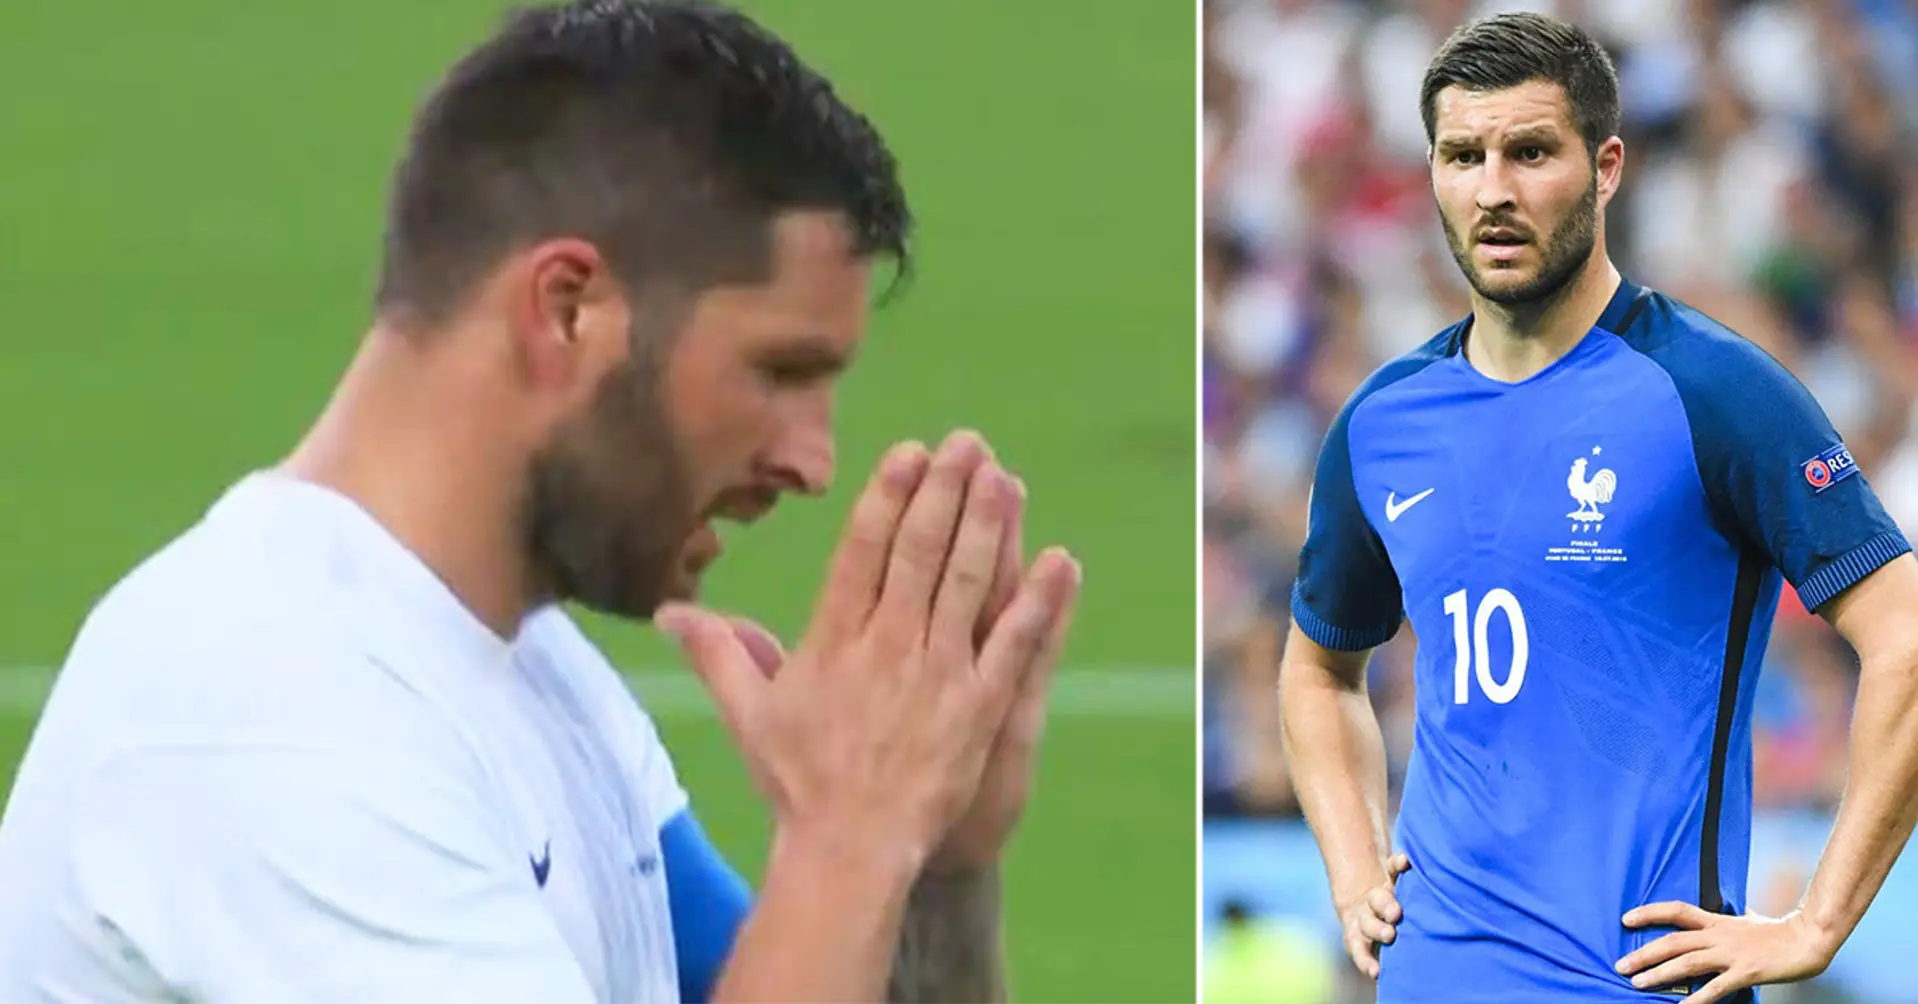 EXPLAINED: Why French striker Gignac apologized after scoring for France vs Mexico